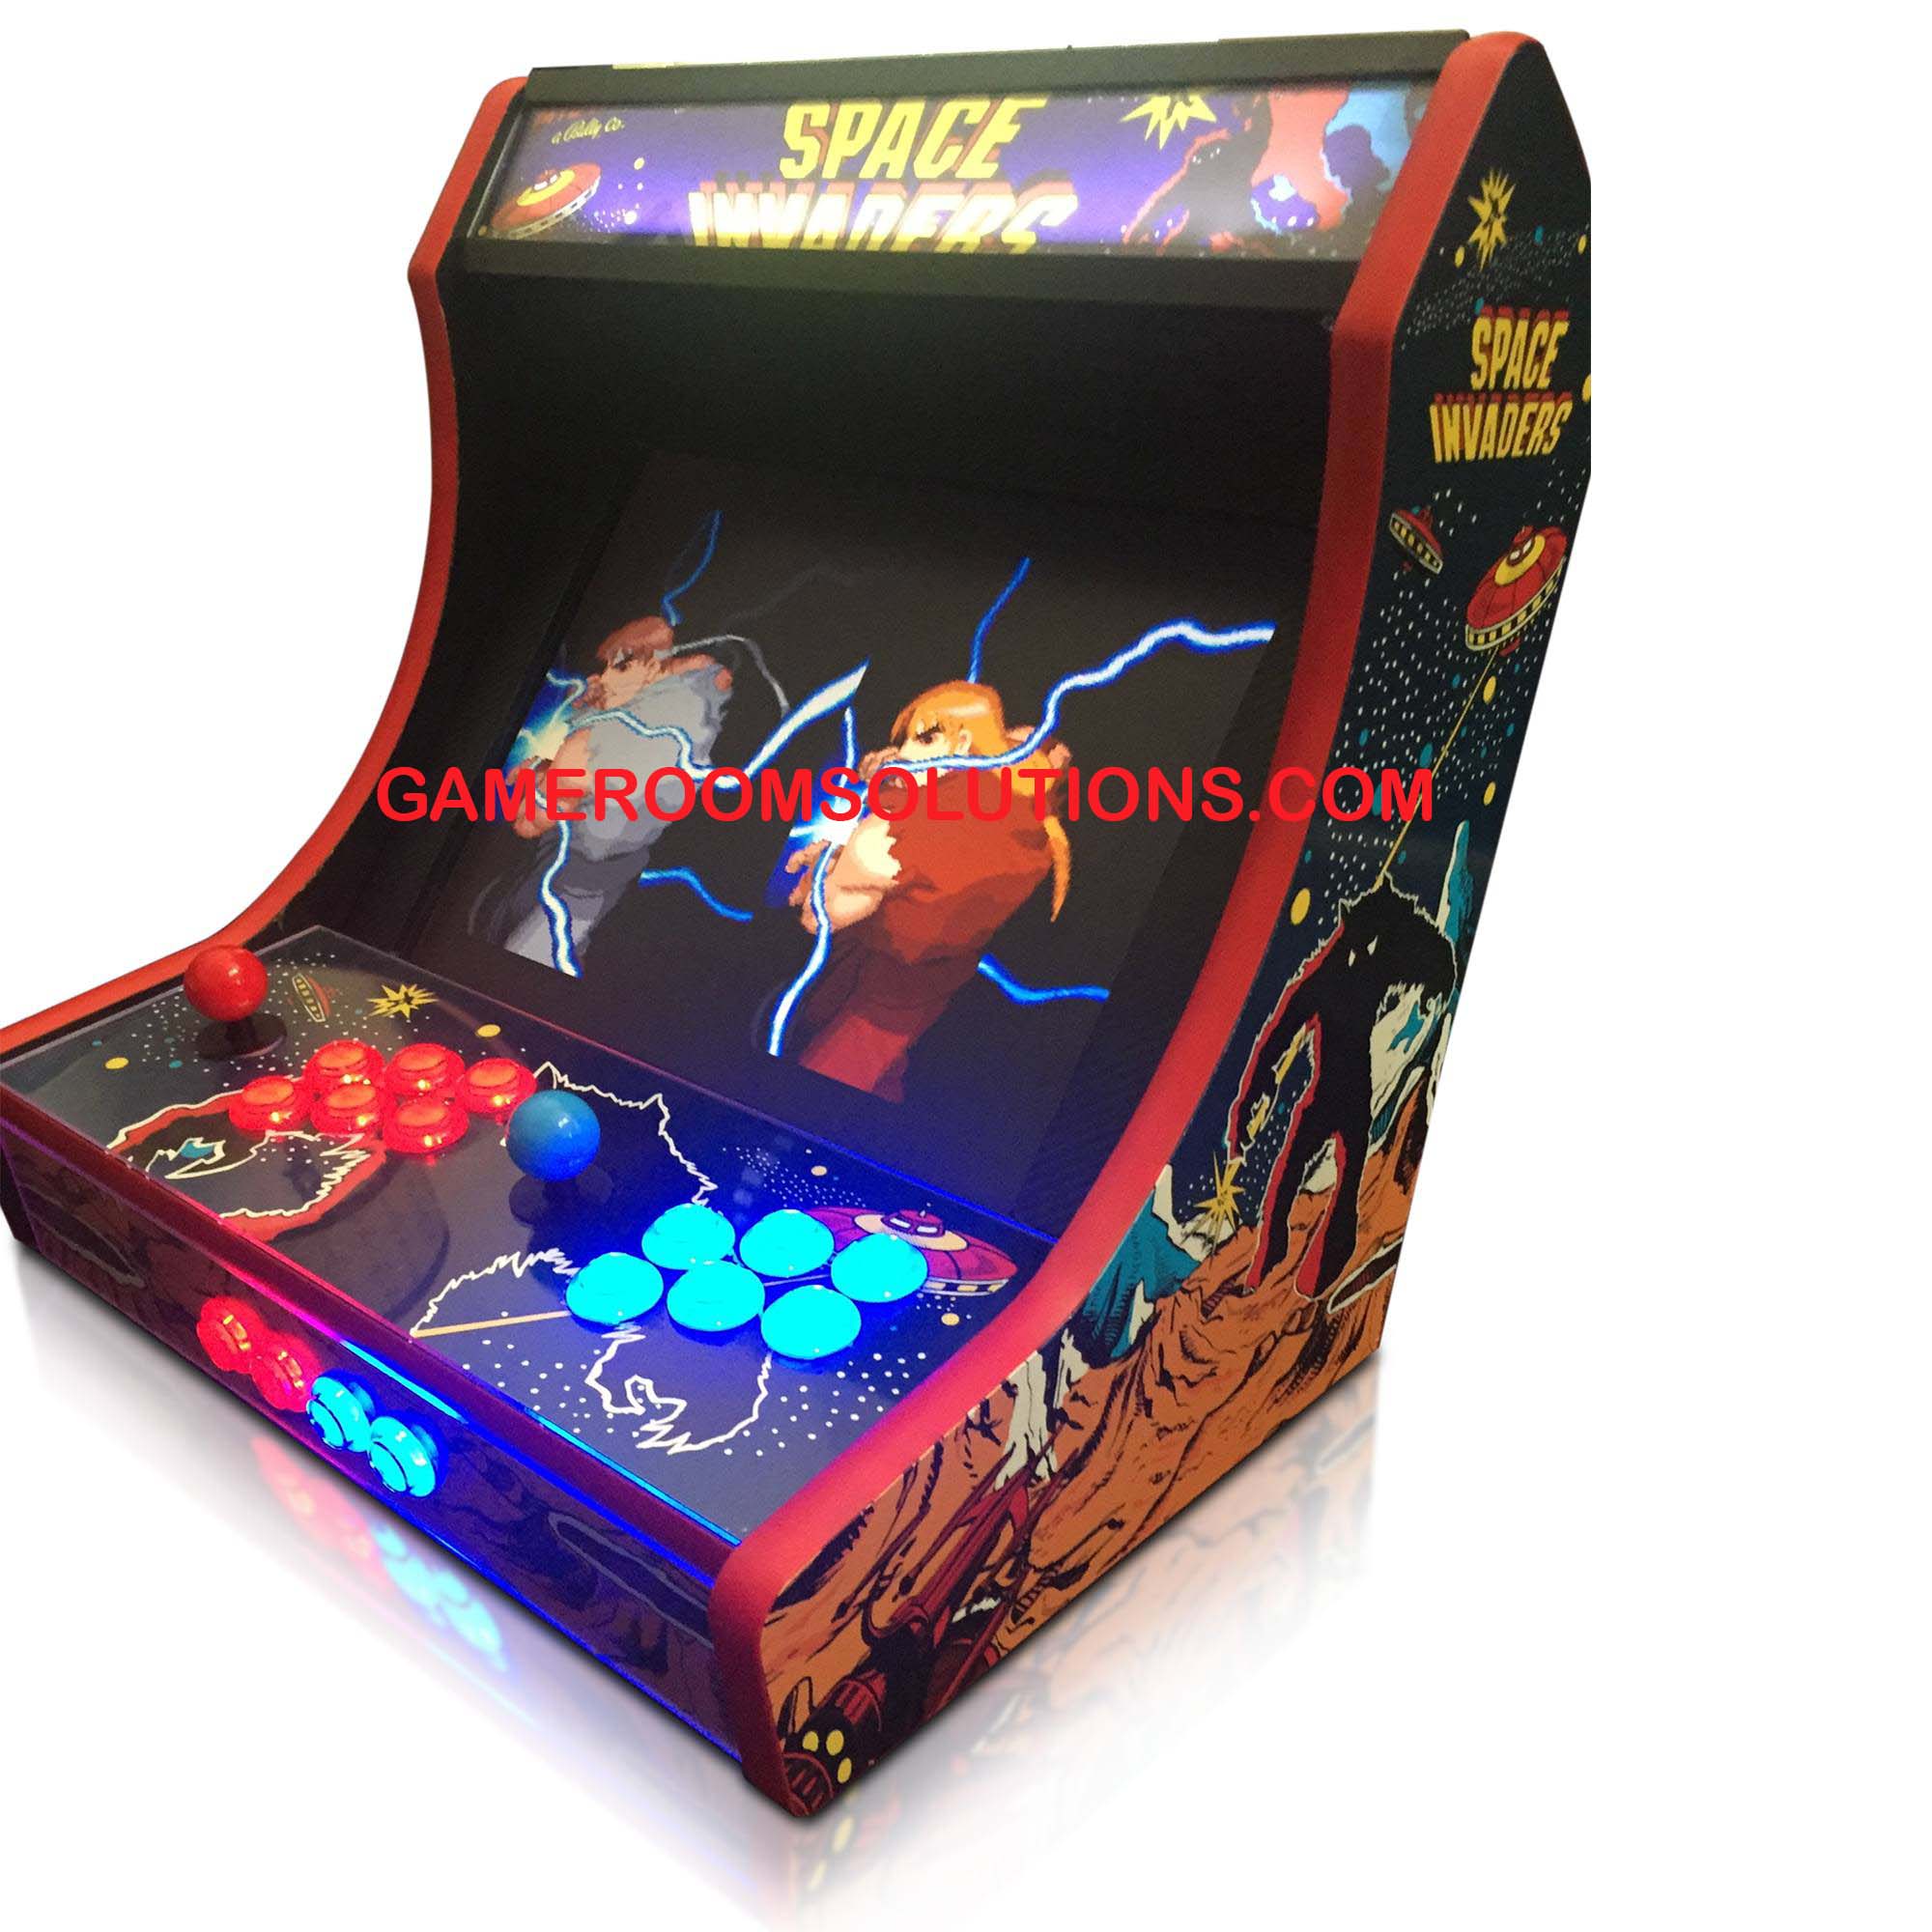 Bartop Arcade Kit Game Room Solutions